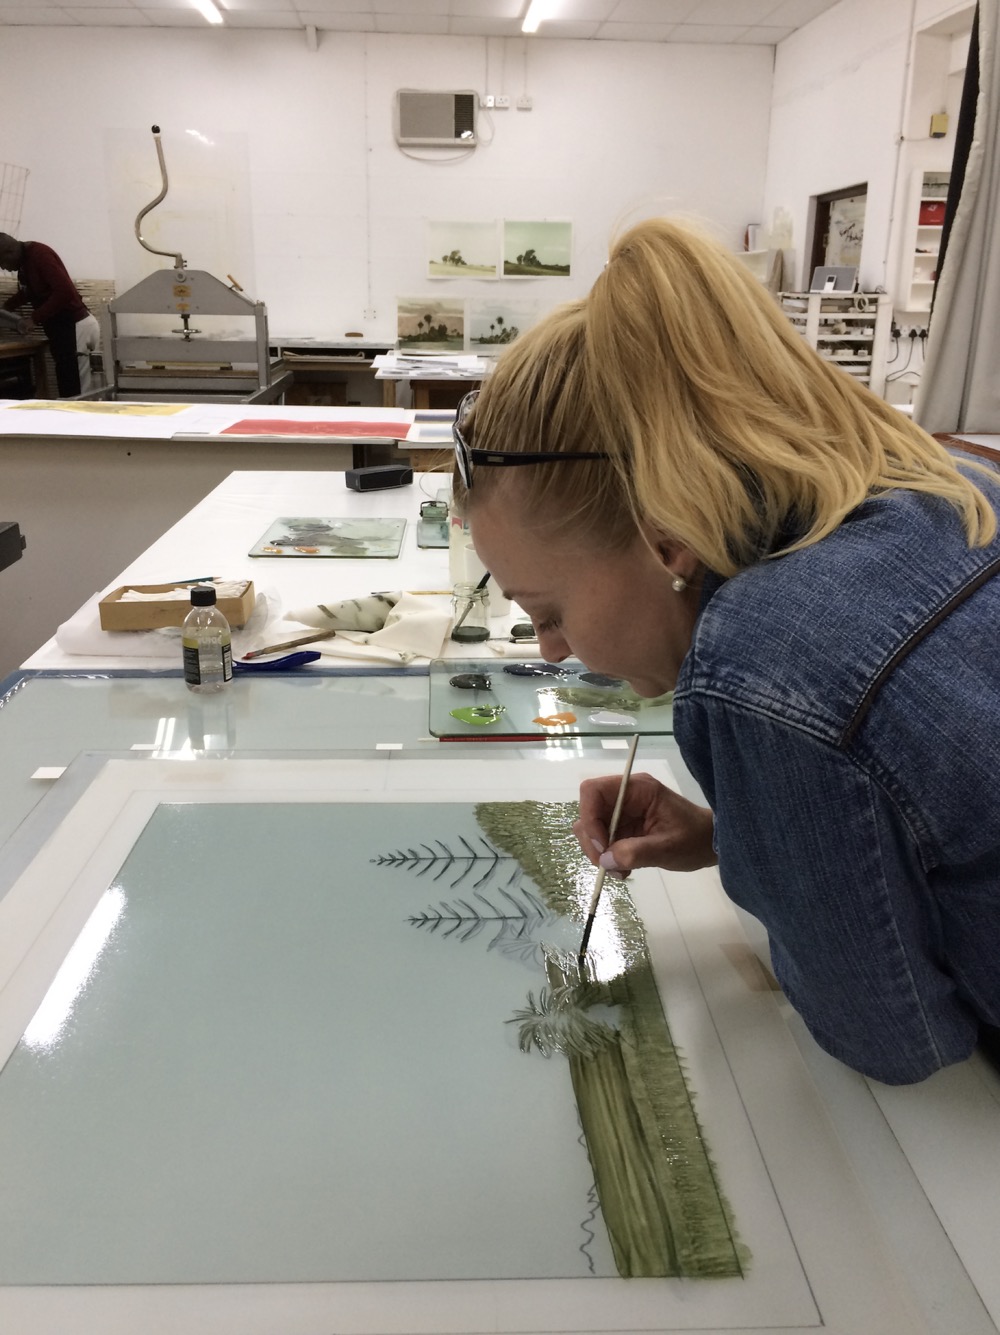 Lithographs and monotypes by Tshwane based artist Eugenie Marais who explores the emotional attachments we have to passing places, landscapes and animals.